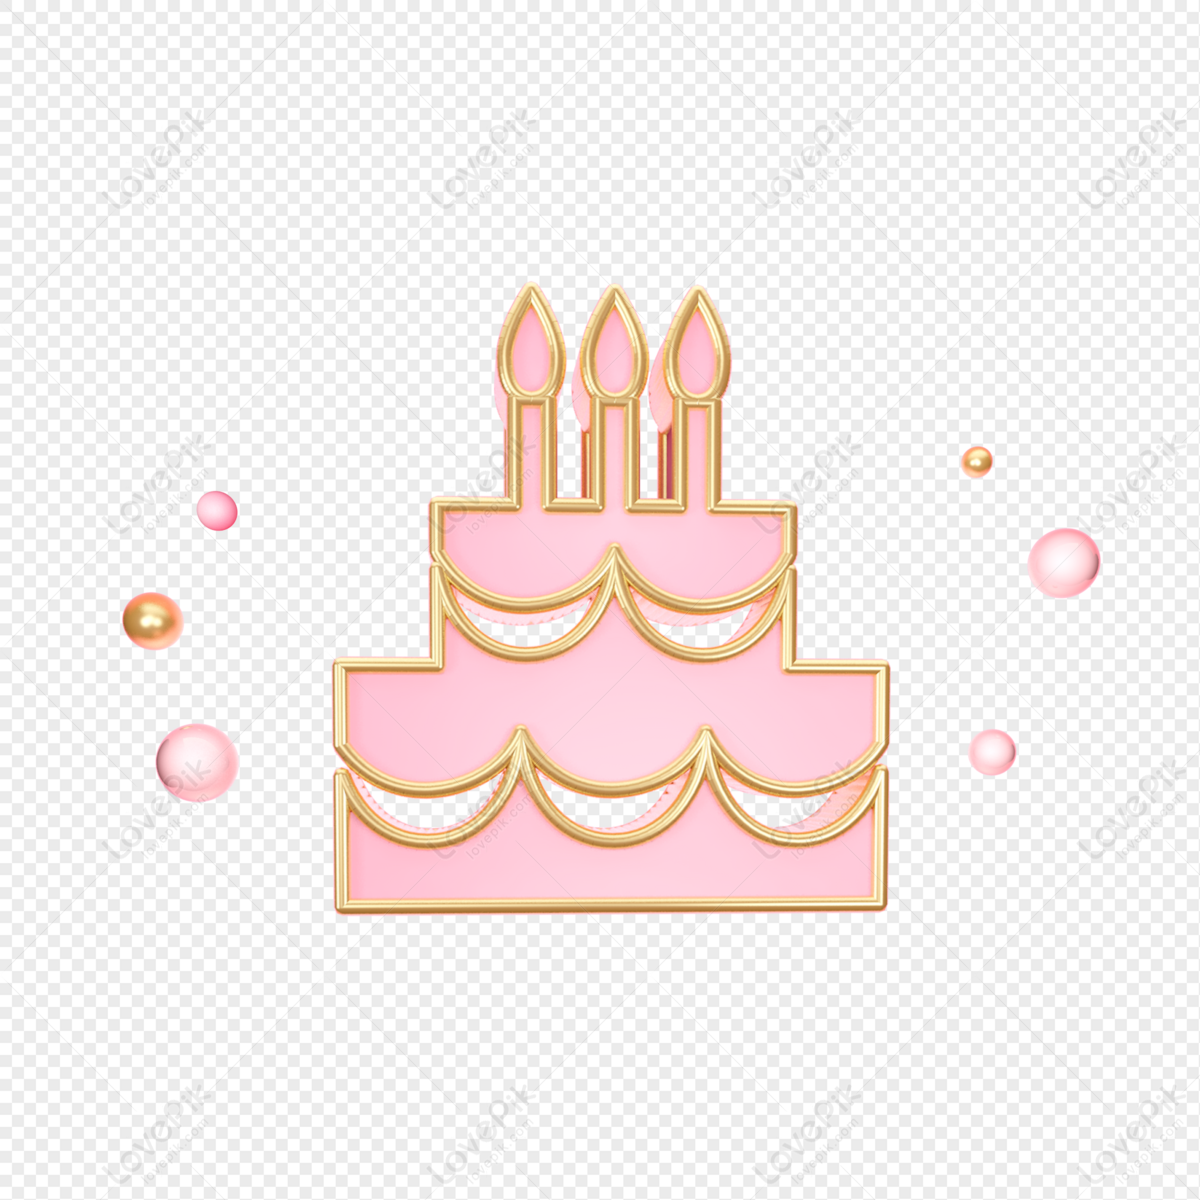 Birthday Cake Cakes Vector PNG Images, Vector Cake Icon, Cake Icons,  Bakery, Birthday PNG Image For Free Download